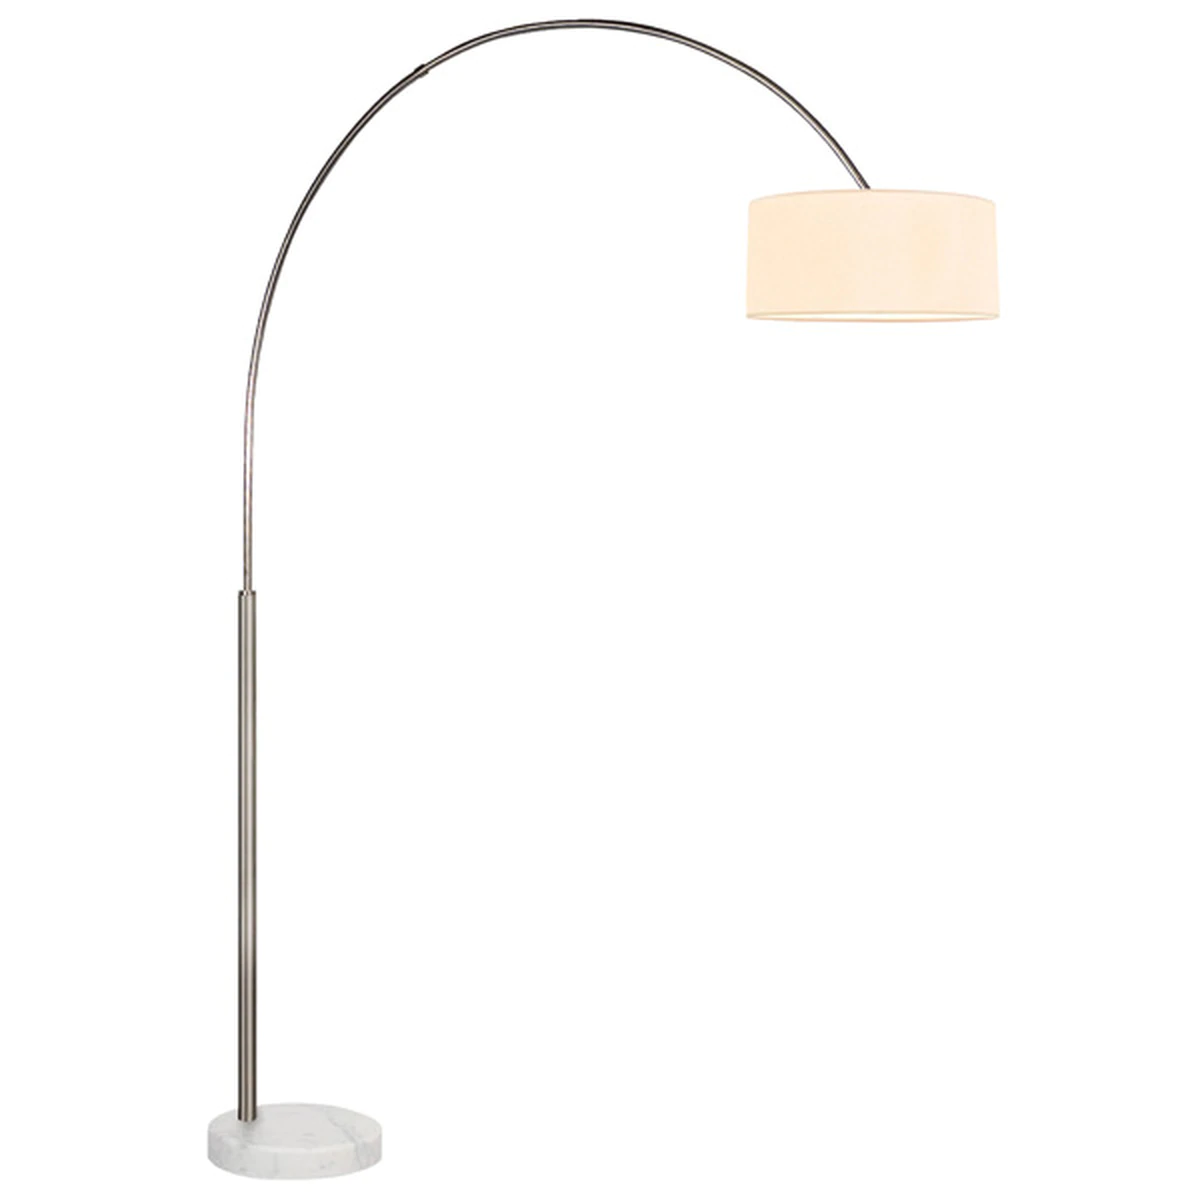 Modern Arched Floor Lamp with marble base for living space